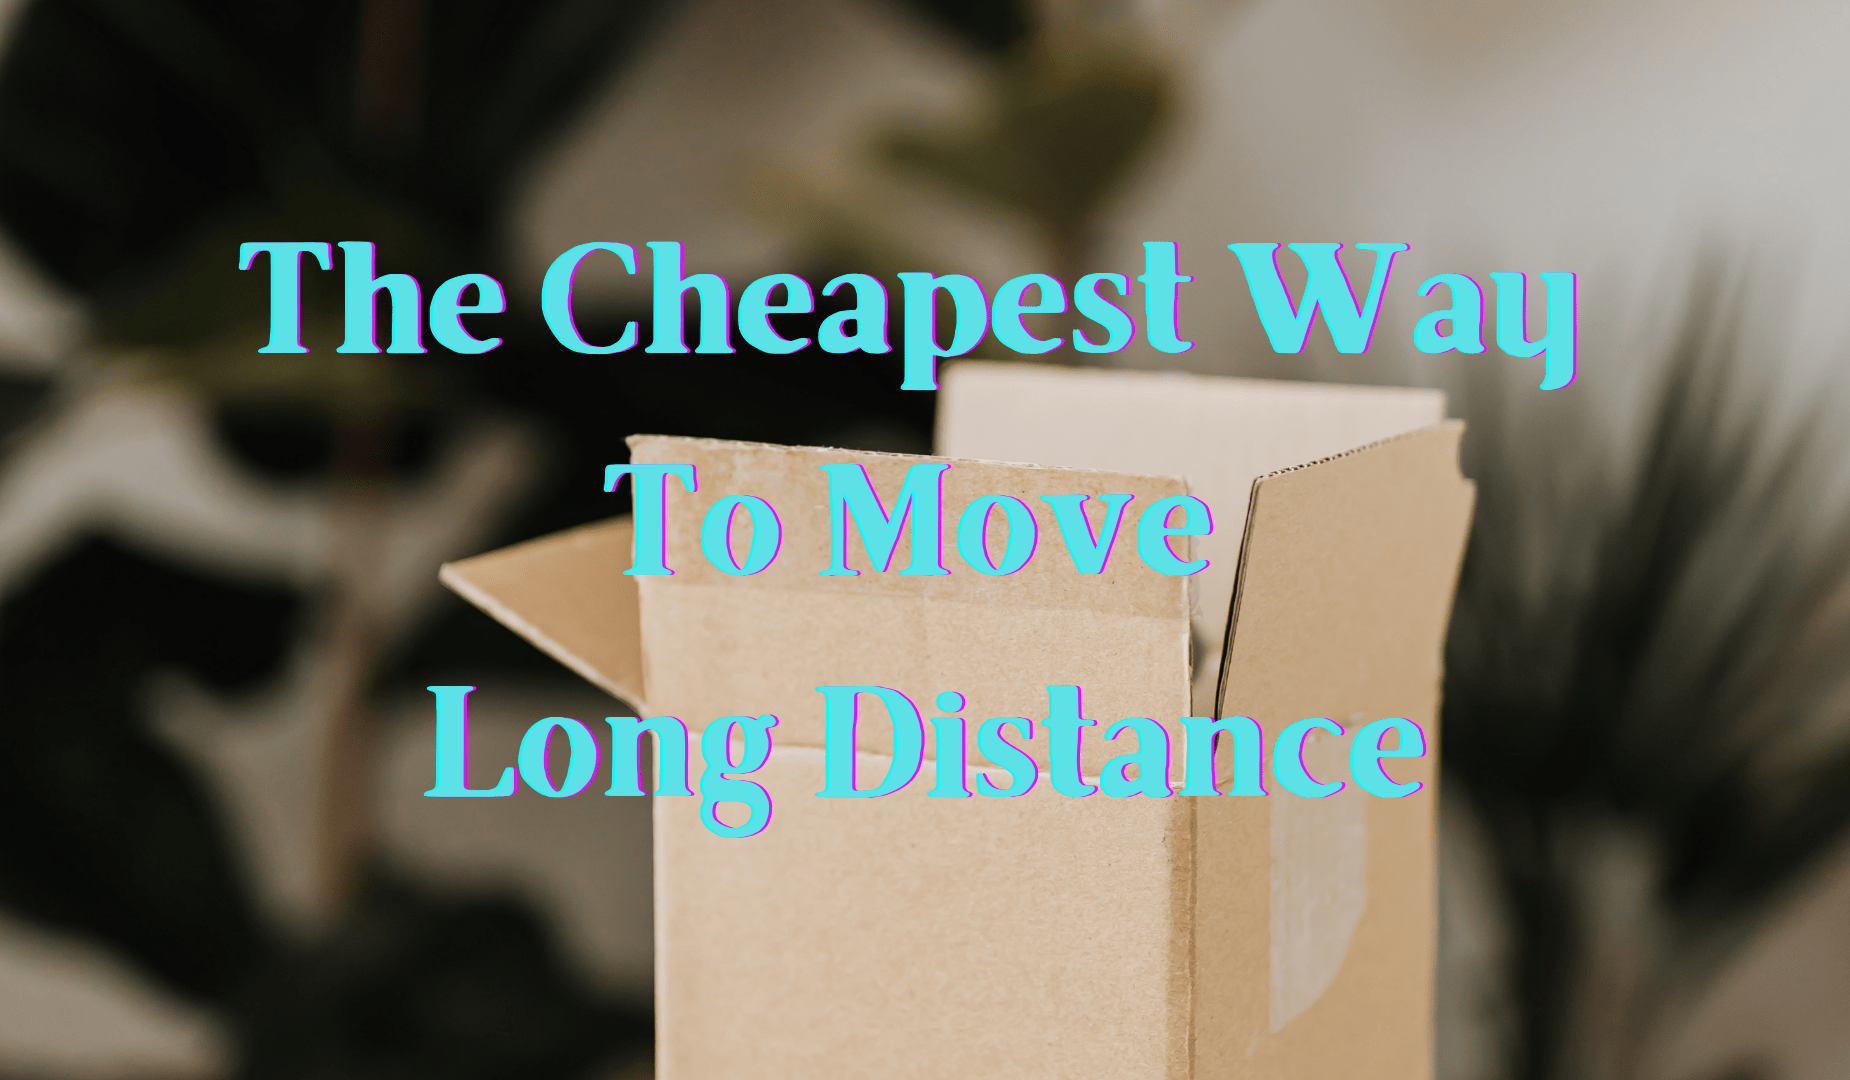 The Cheapest Way to Move Long Distance